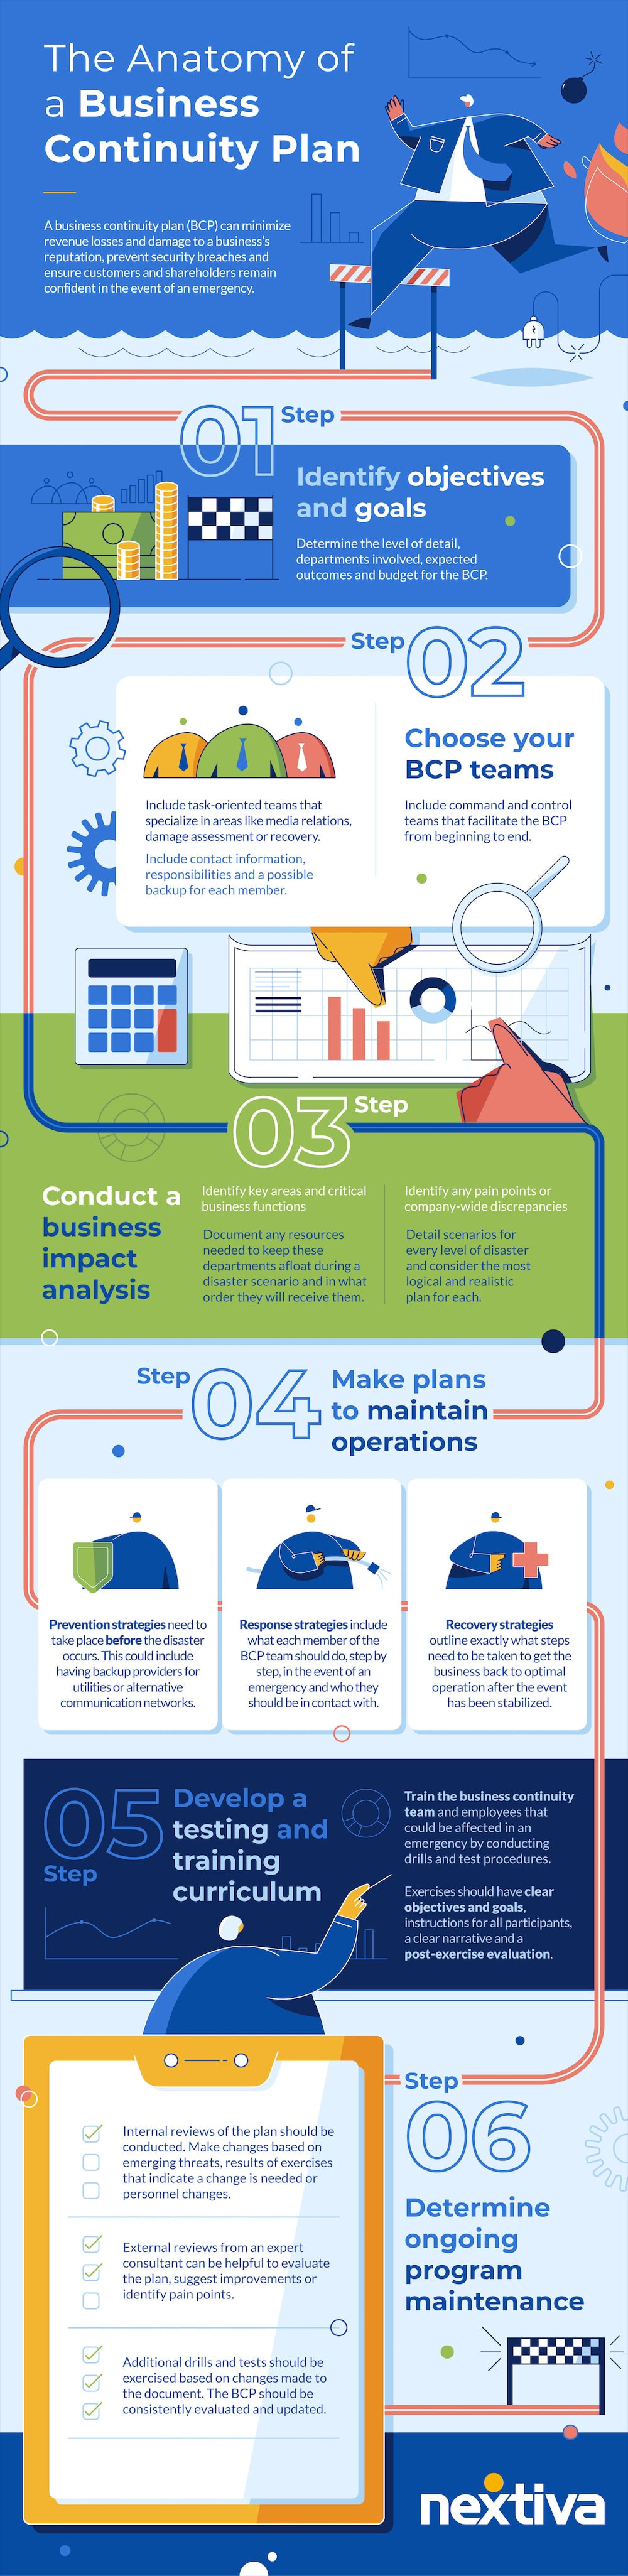 Business Continuity Plan Infographic - Anatomy of a BCP 